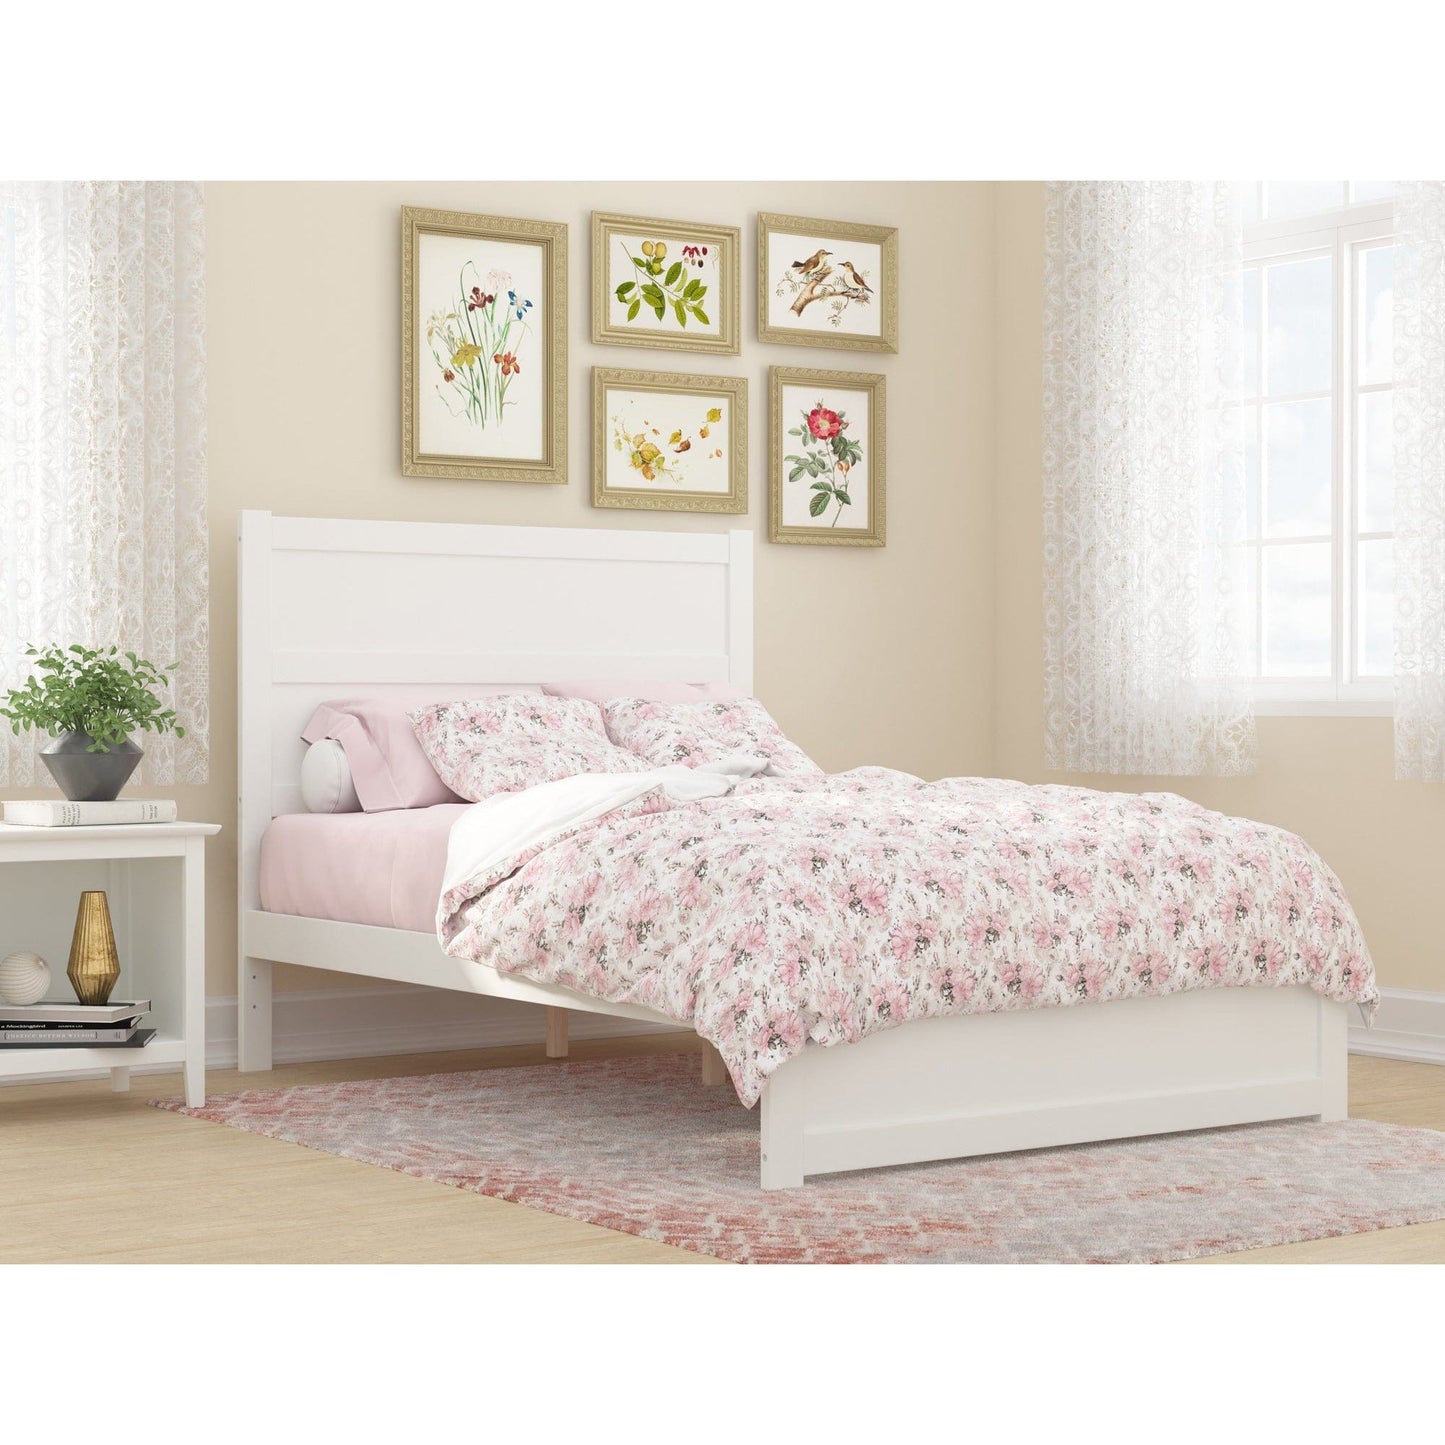 AFI Furnishings NoHo Full Bed with Footboard in White AG9160032